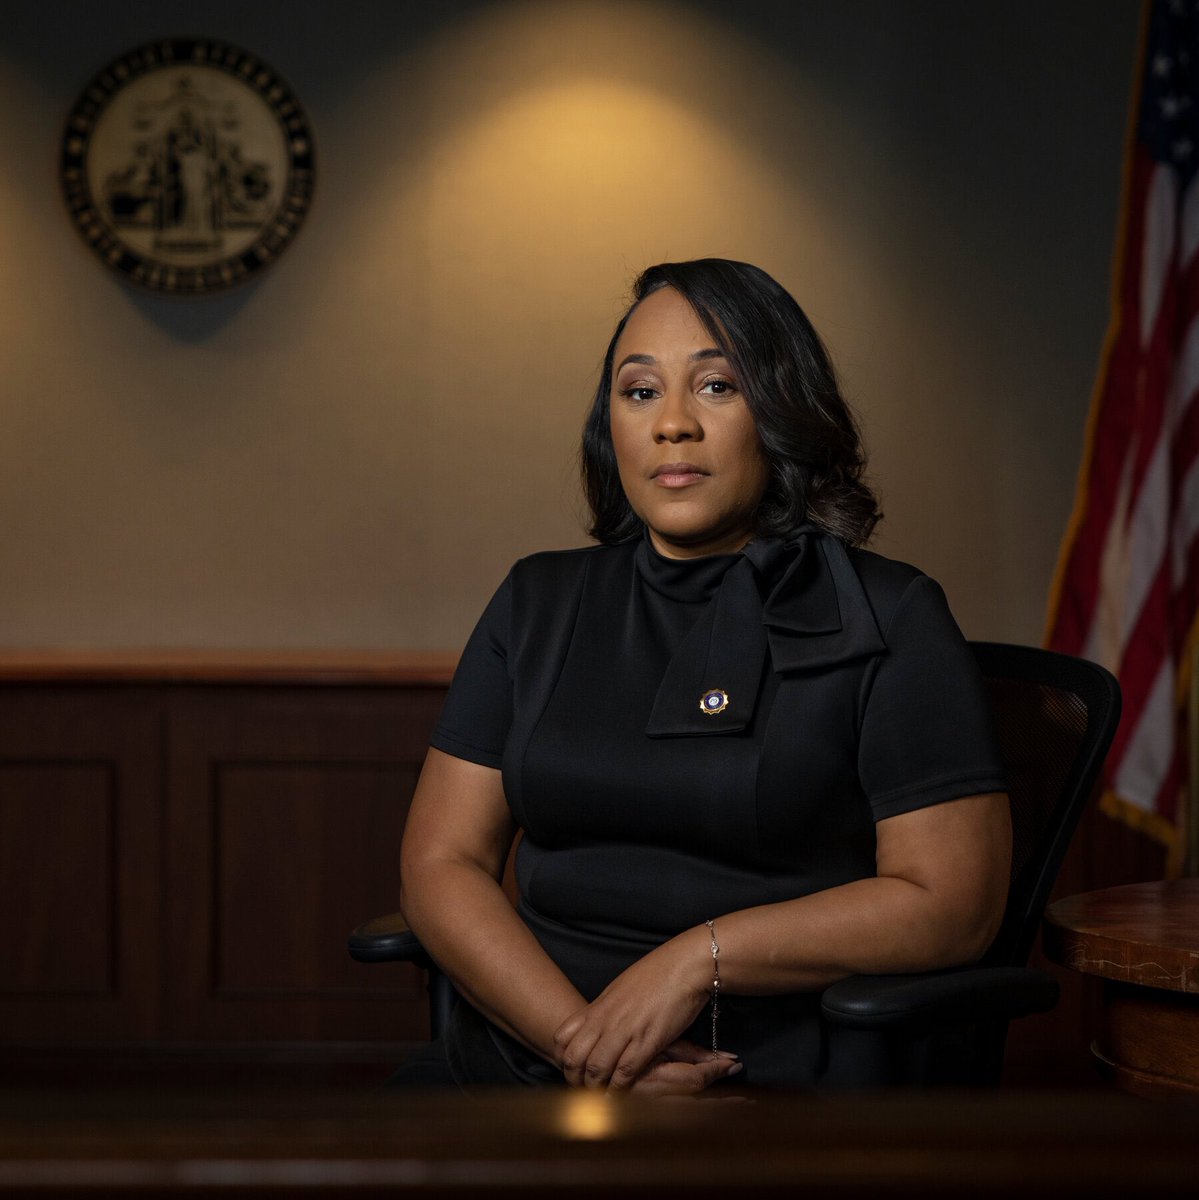 The Fulton County judge has confirmed that the district attorney Fani Willis has the full authority to proceed with the prosecution of the 2020 election interference case.